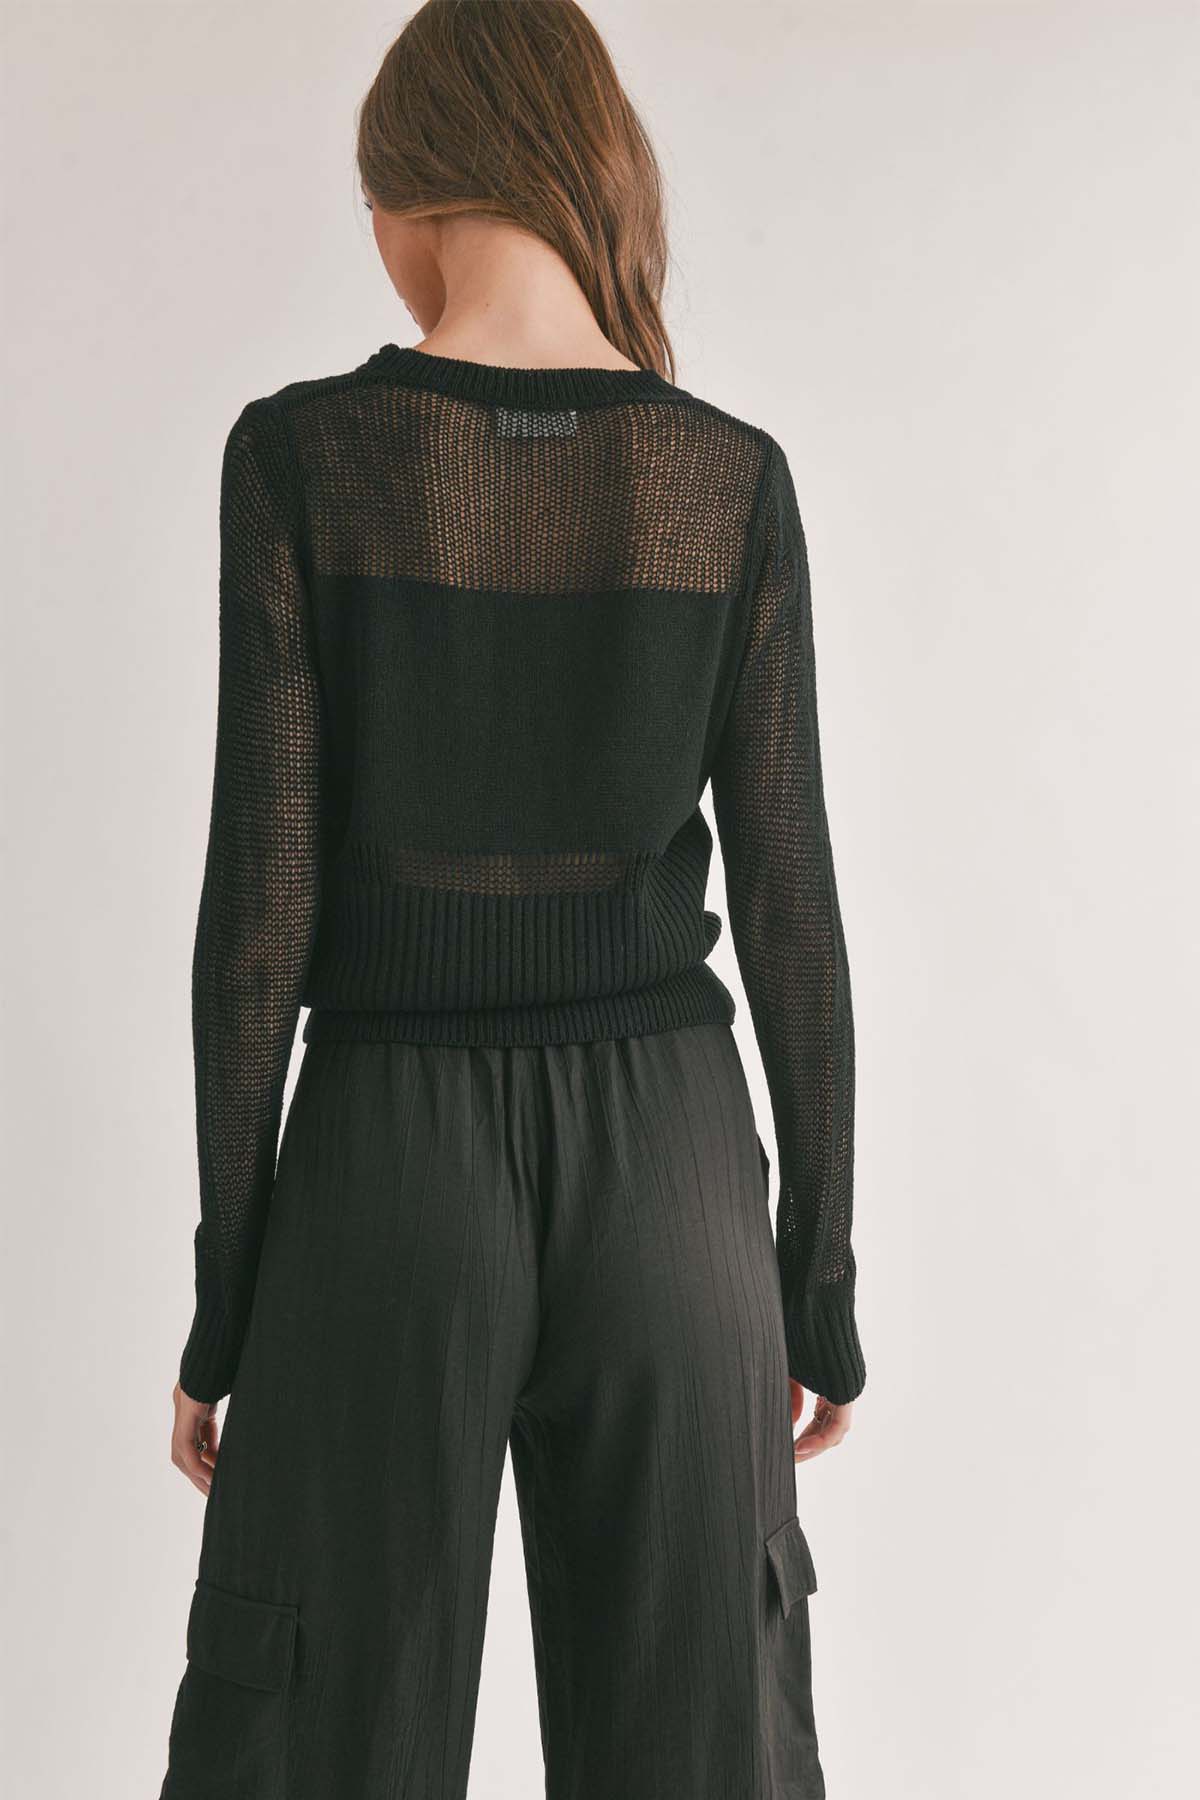 Sage the Label - Something to Desire Sweater - Black - Back